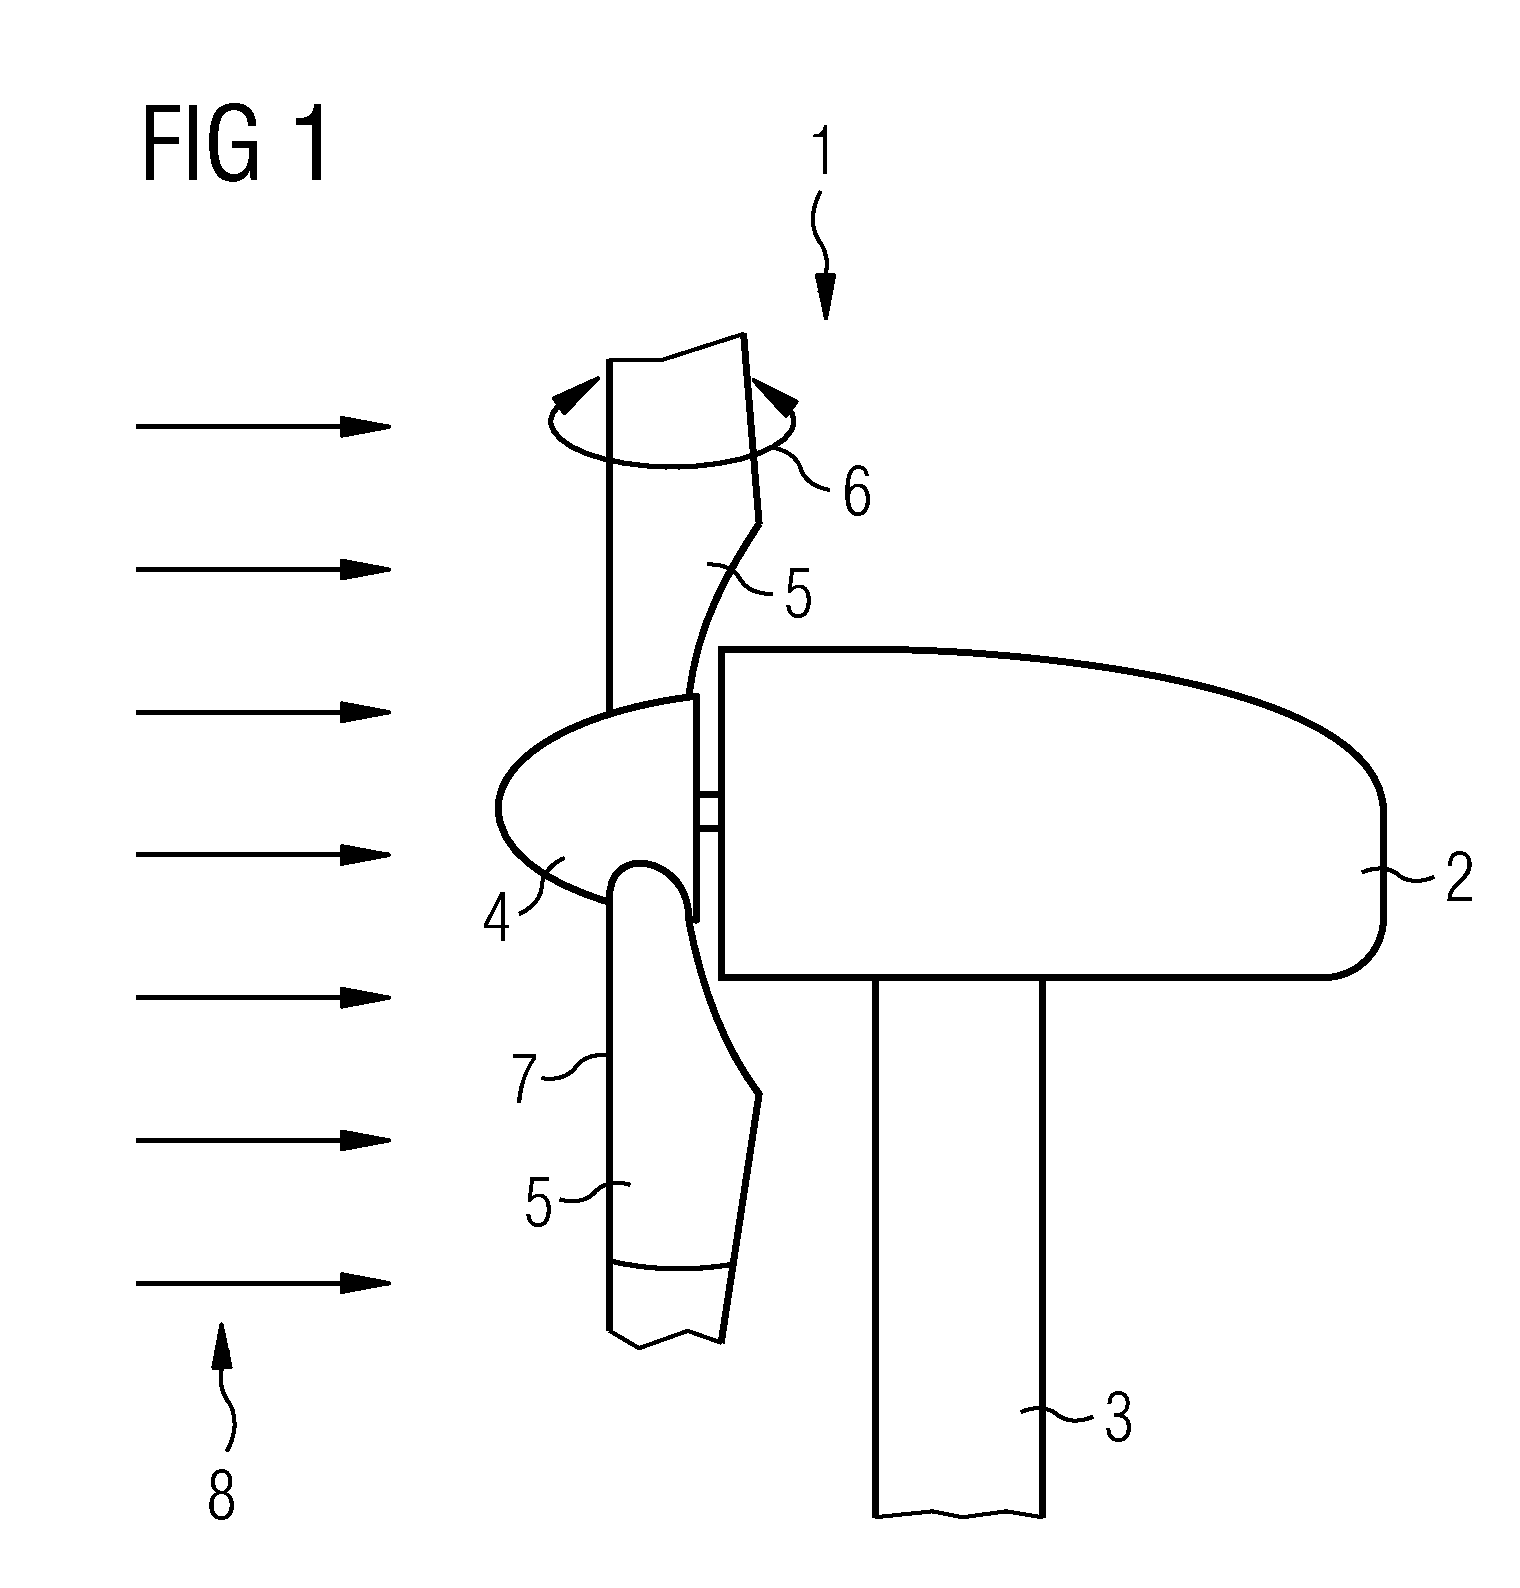 Wind energy installation comprising a wind speed measuring system